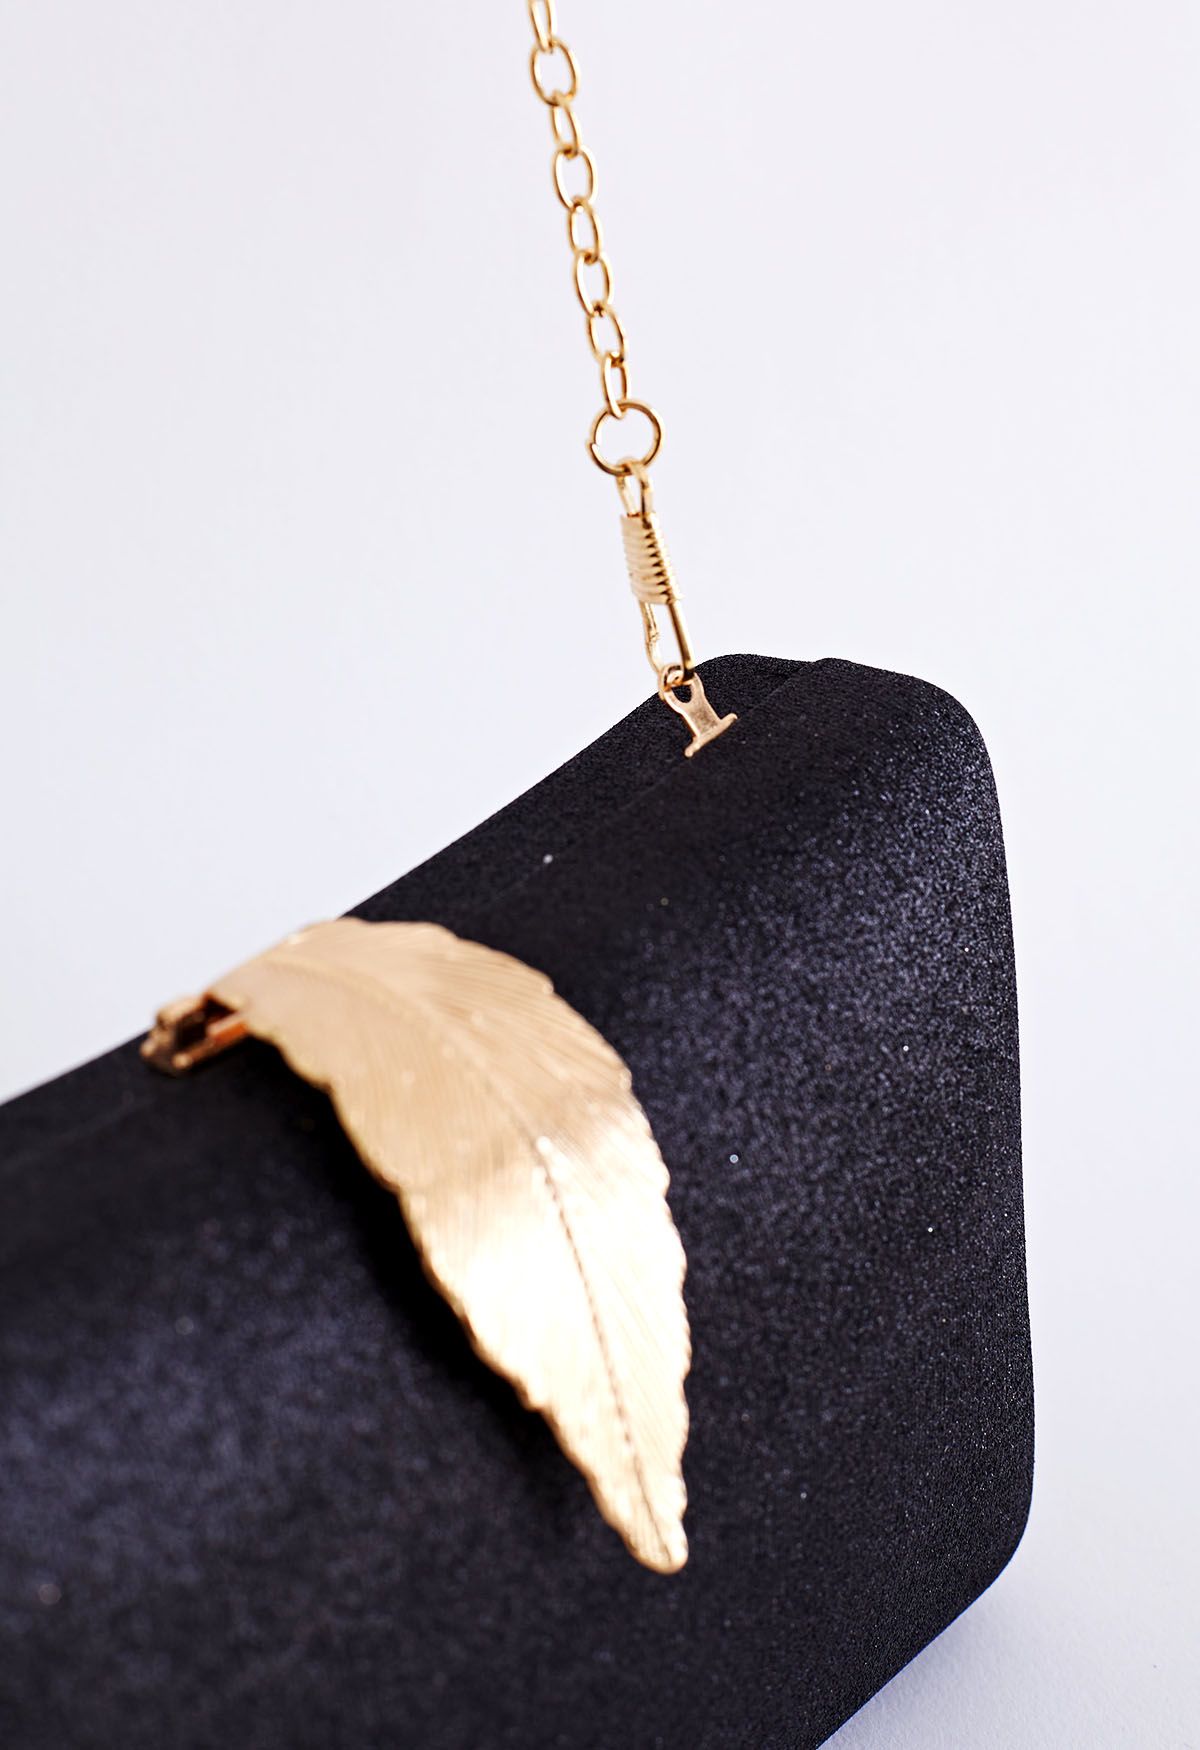 Solid Textured Leaf Clutch in Black